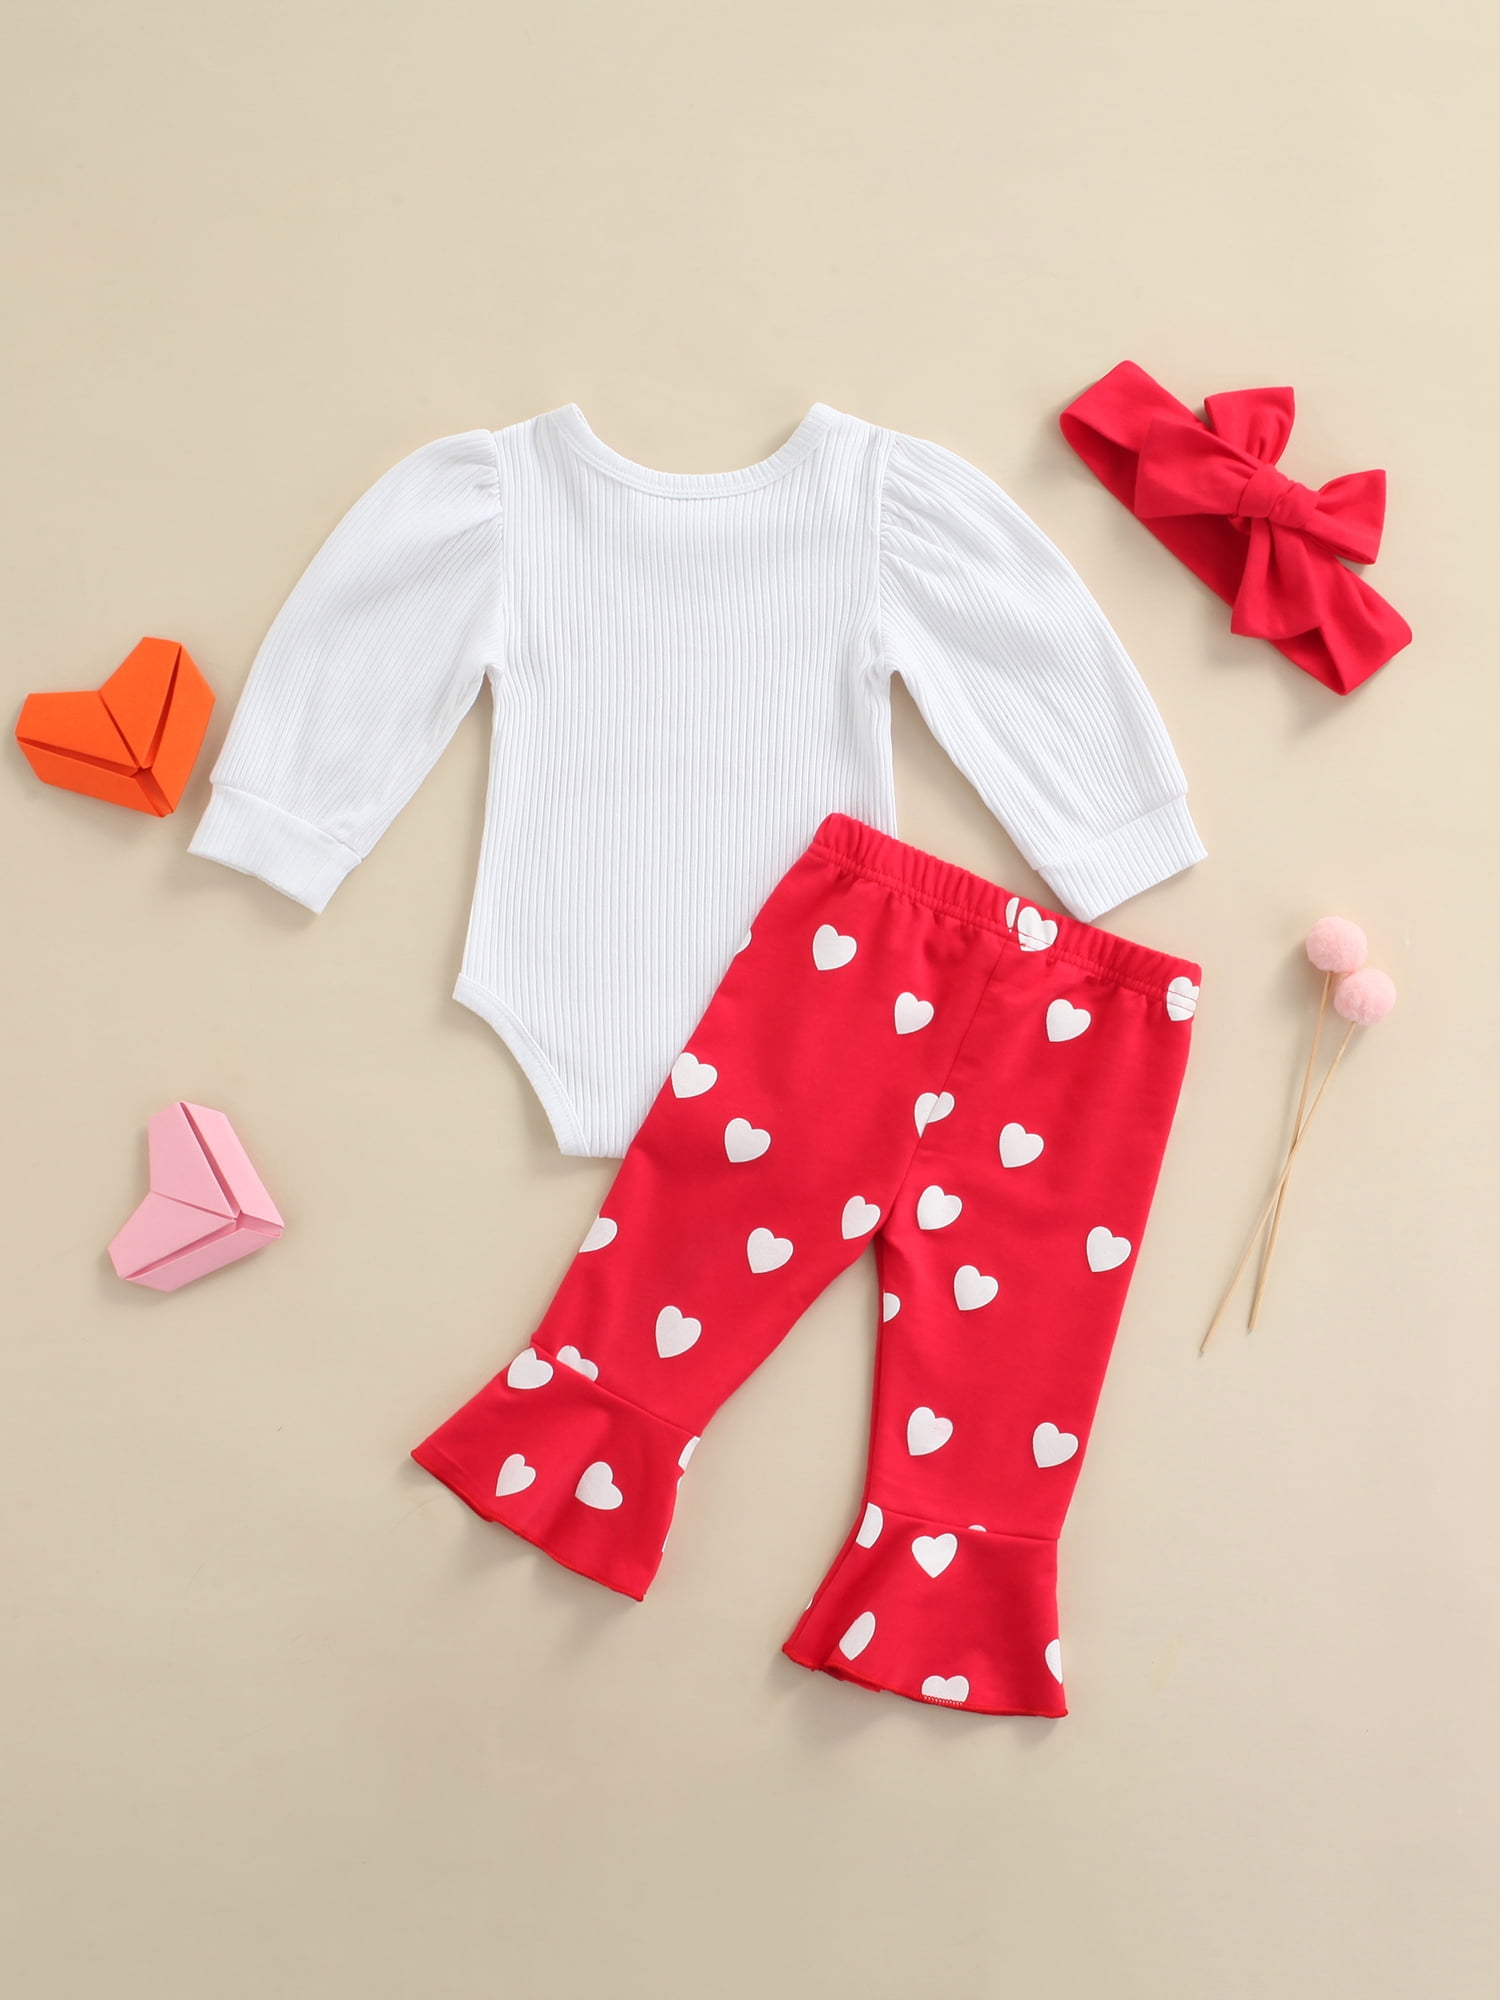 Toddler Baby Girls Outfits 2 Piece Kids Clothes Set Sequin Heart Flared Sleeve Top Printing Pant Valentine's Day Outfits